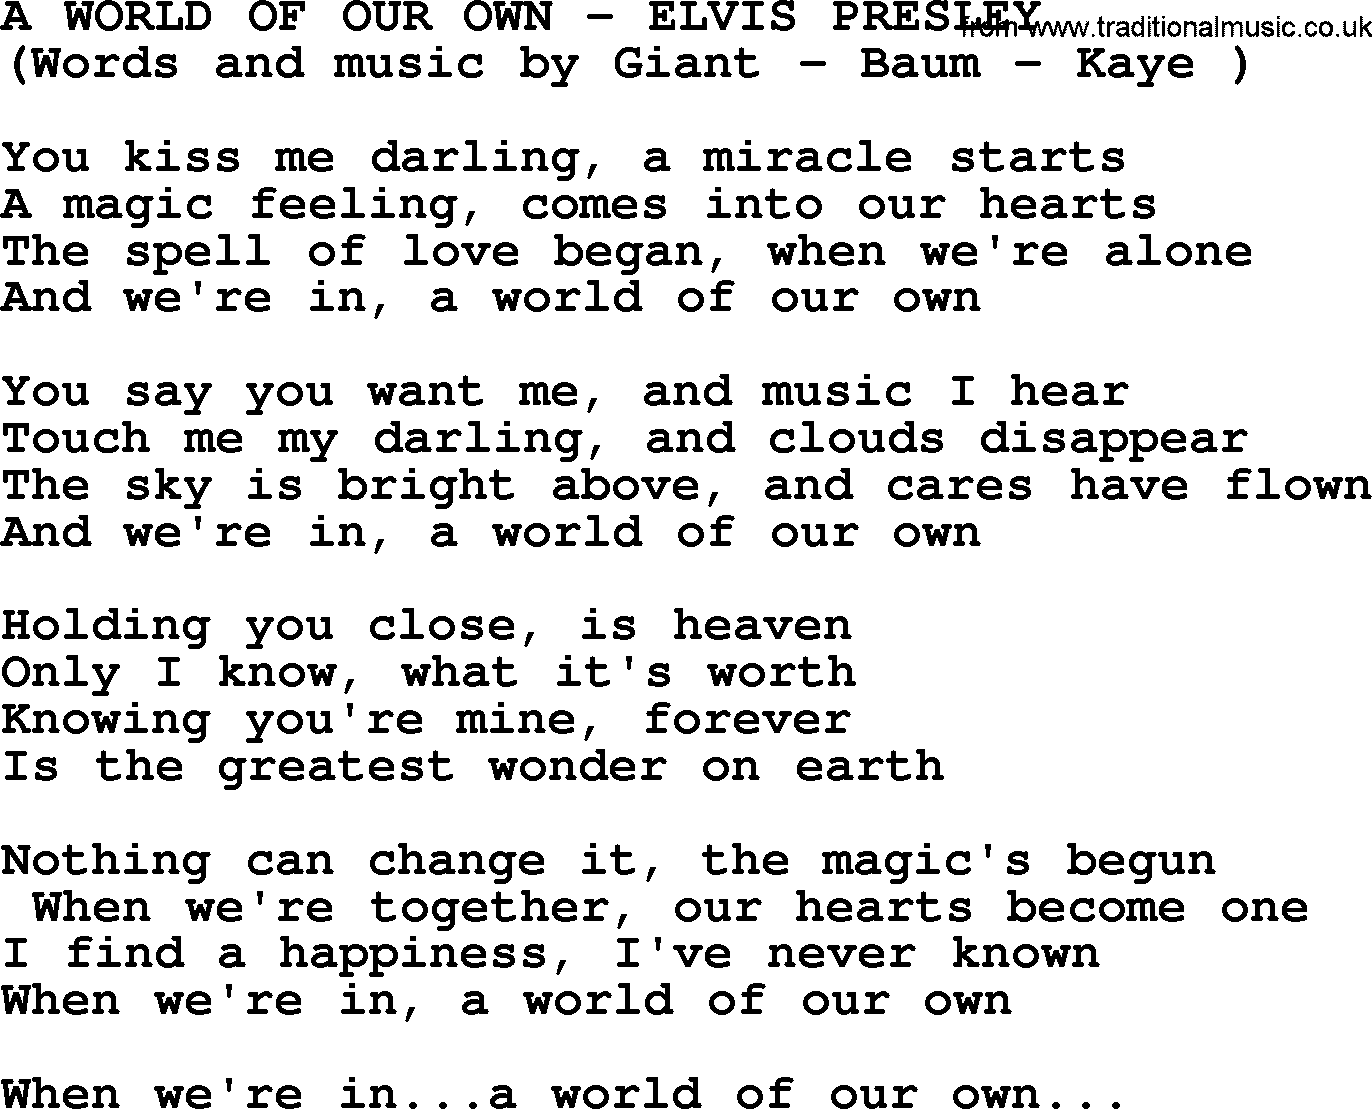 Elvis Presley song: A World Of Our Own lyrics